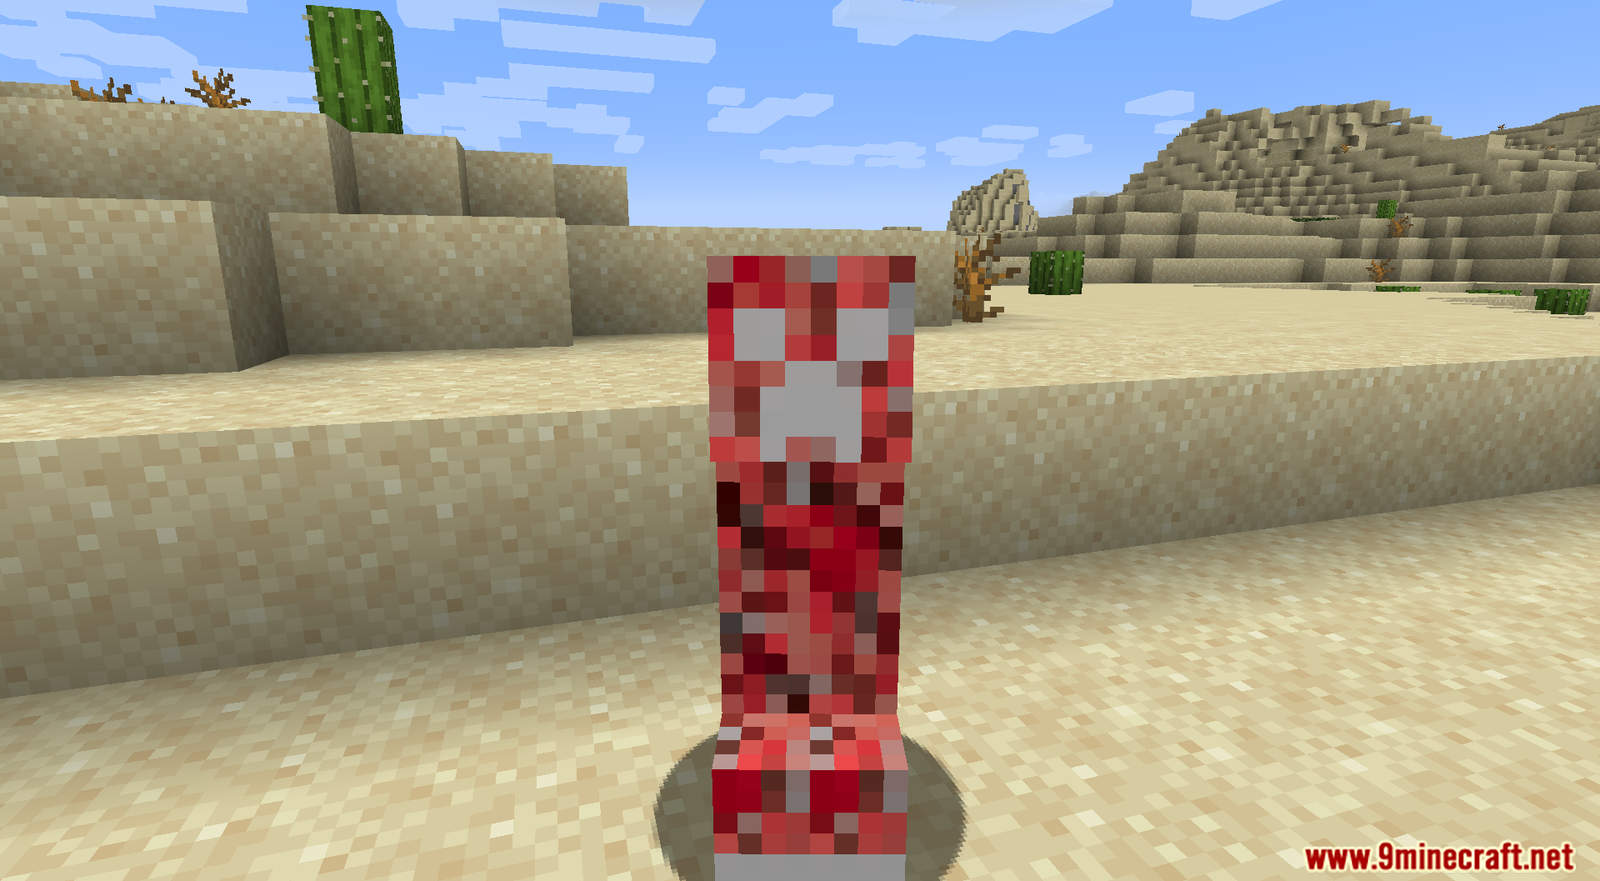 Crazy Creepers mod for Minecraft (6)